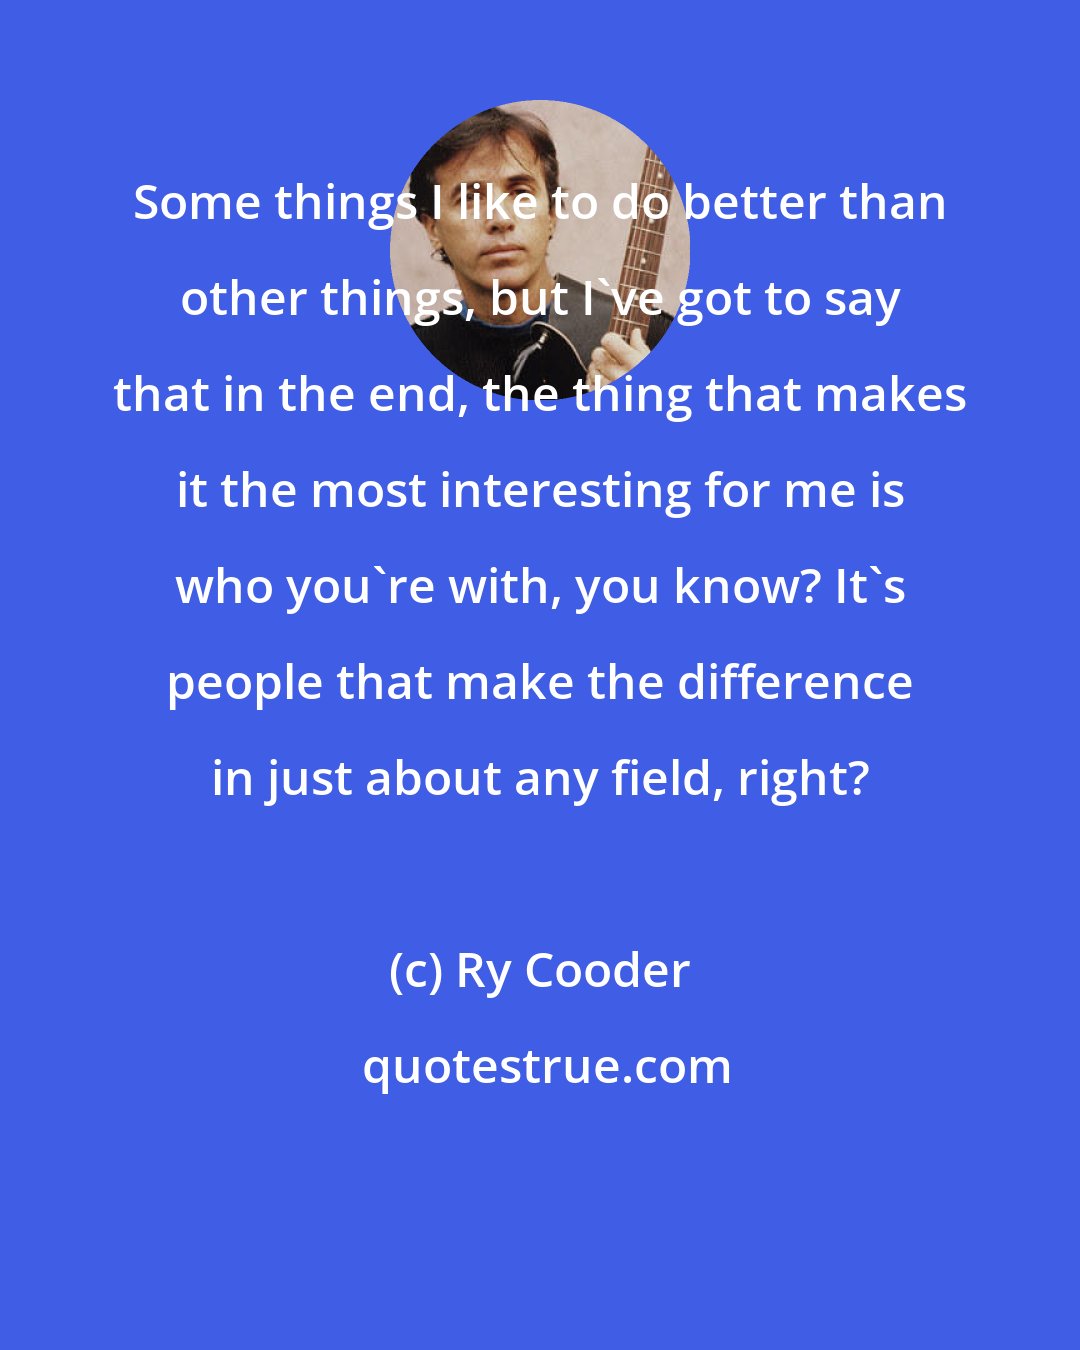 Ry Cooder: Some things I like to do better than other things, but I've got to say that in the end, the thing that makes it the most interesting for me is who you're with, you know? It's people that make the difference in just about any field, right?